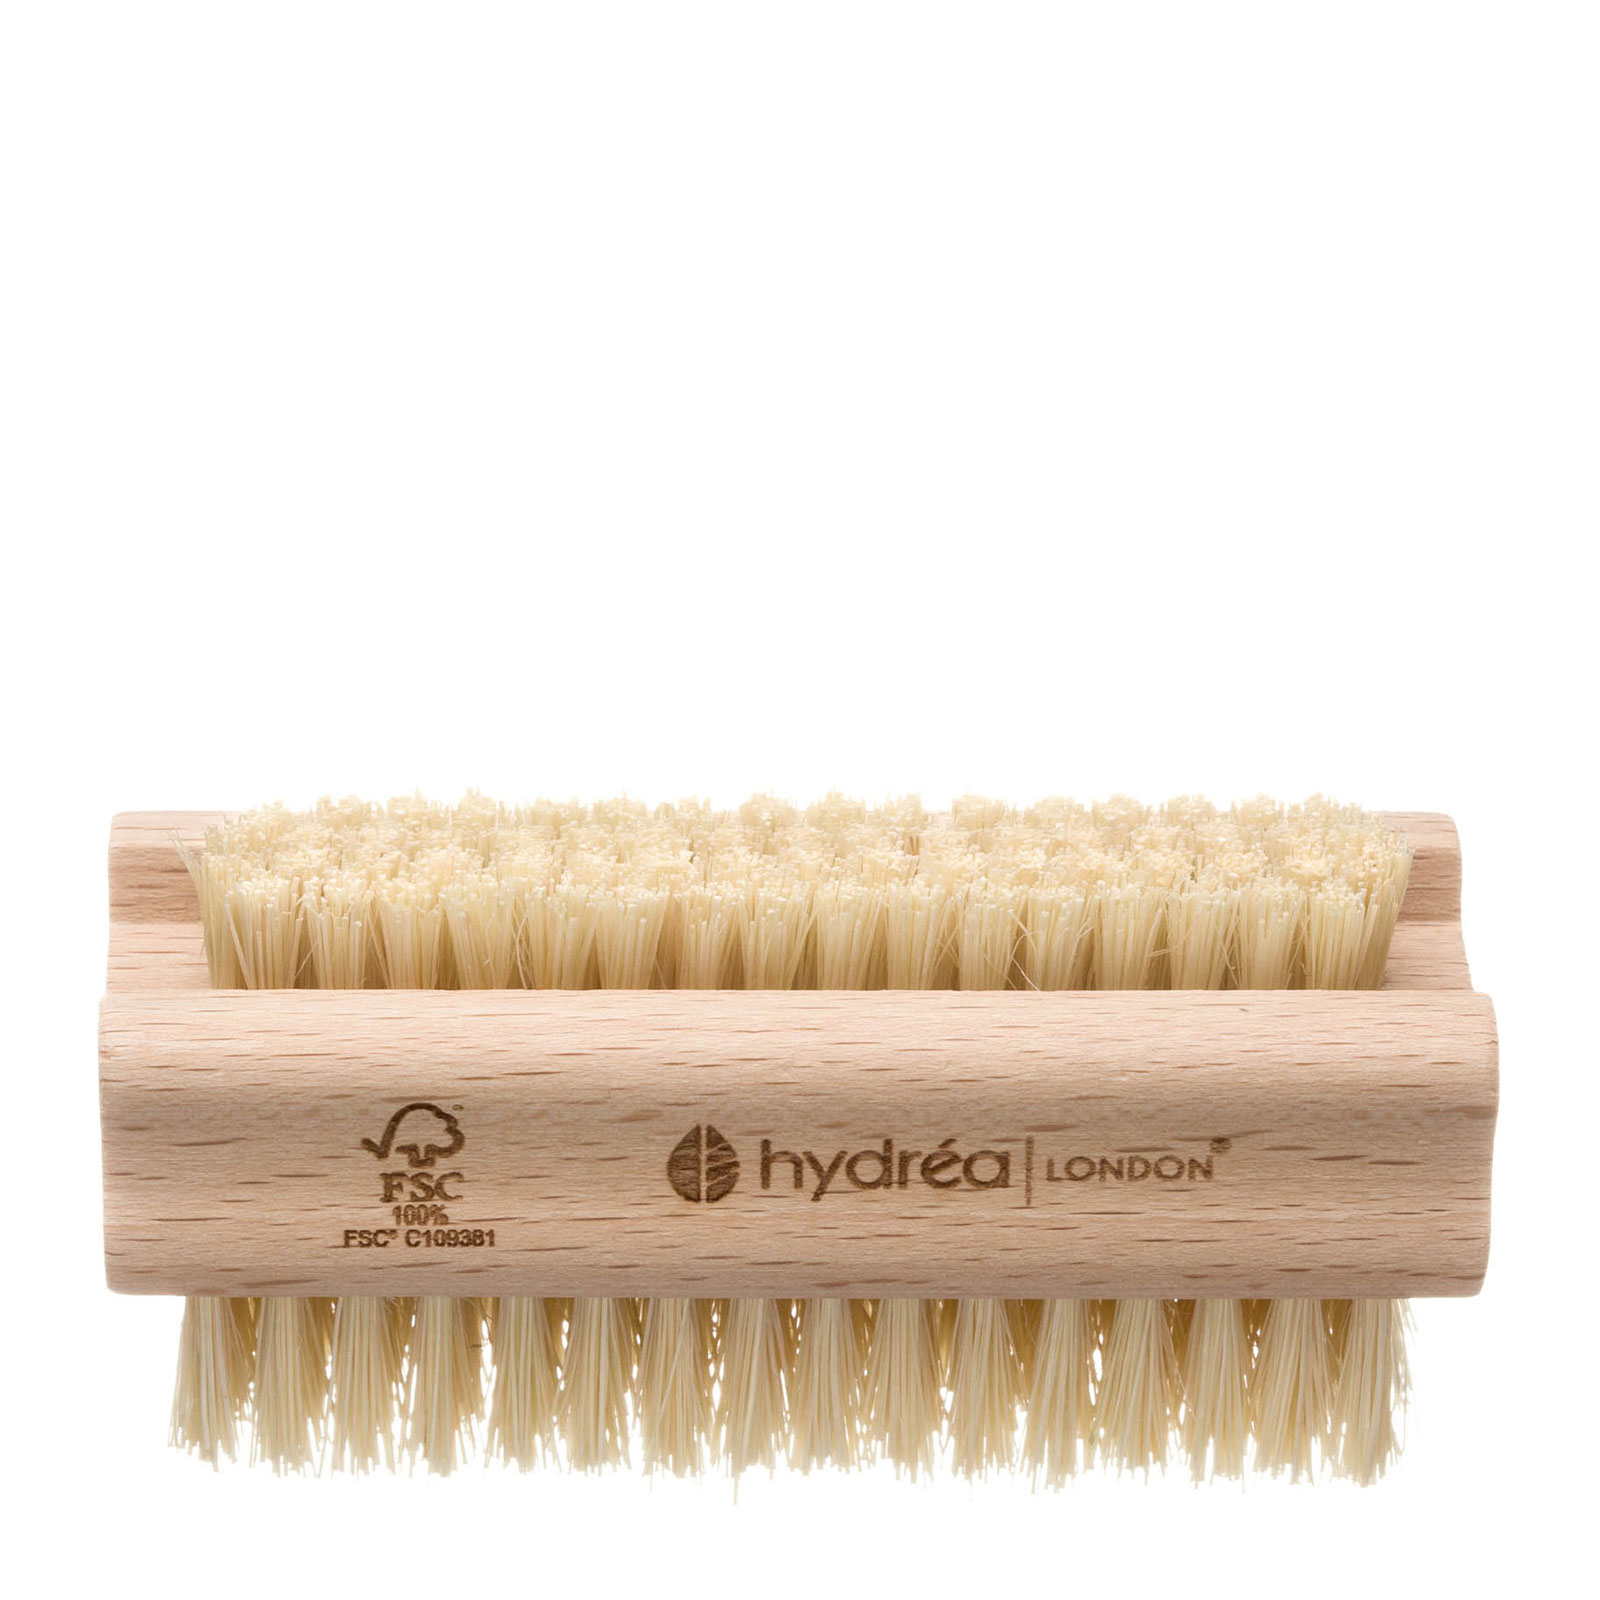 Hydrea London Extra Tough Dual Sided Hand & Nail Brush With Cactus Bristles - Hard Strength